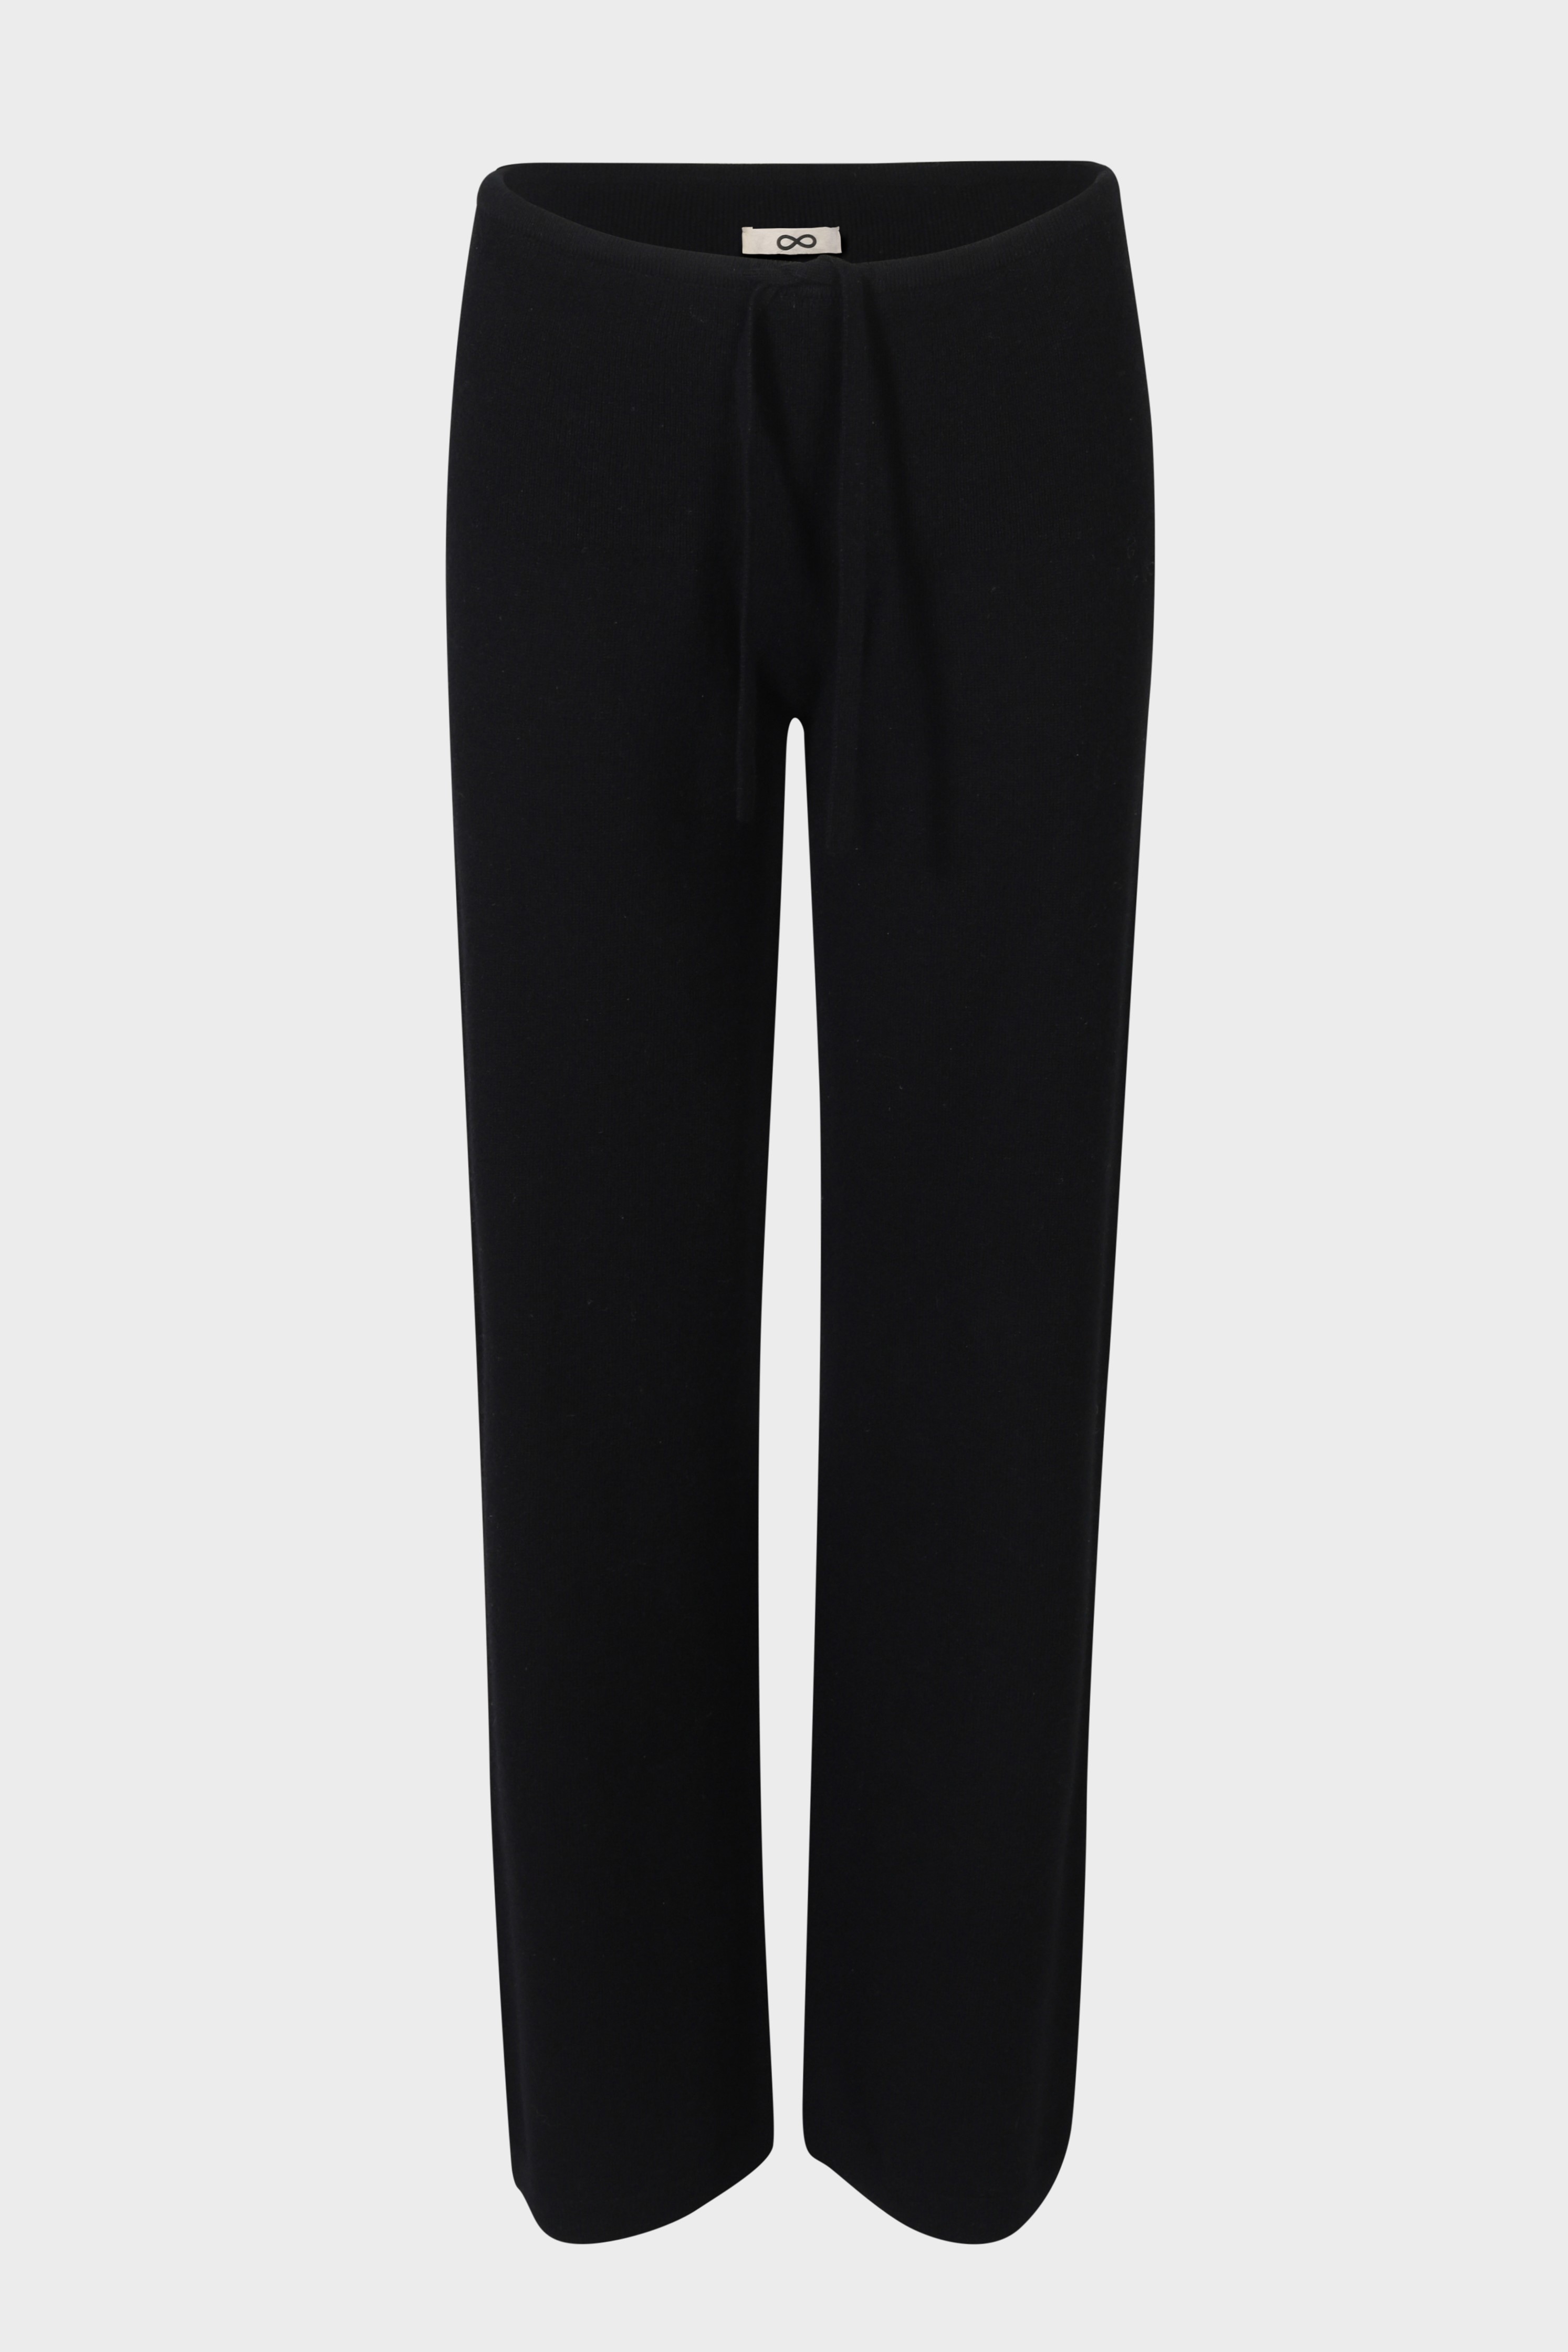 SMINFINITY Chilly Knit Pant in Black